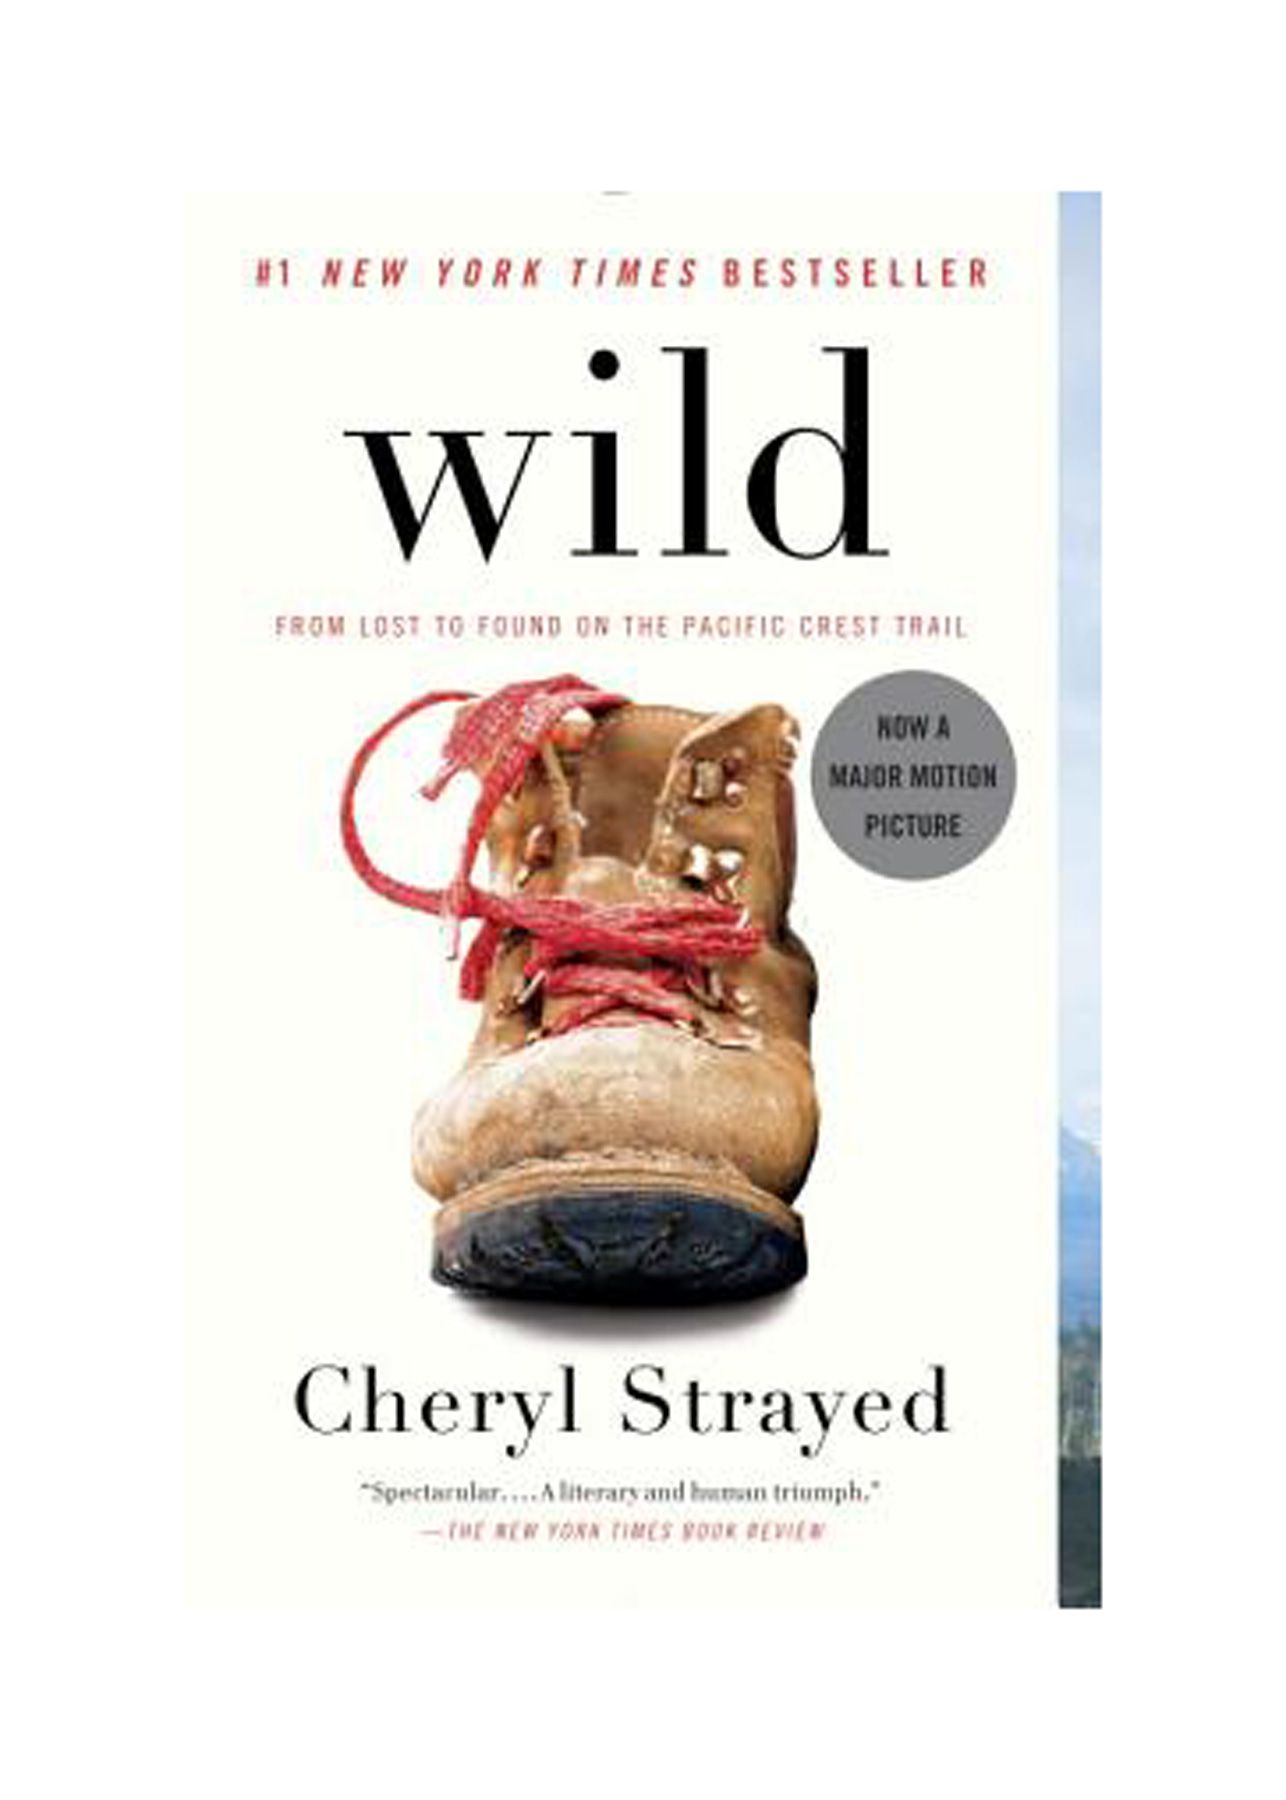 Bons livros para ler em seus 20 anos: 'Wild: From Lost to Found on the Pacific Crest Trail' por Cheryl Strayed